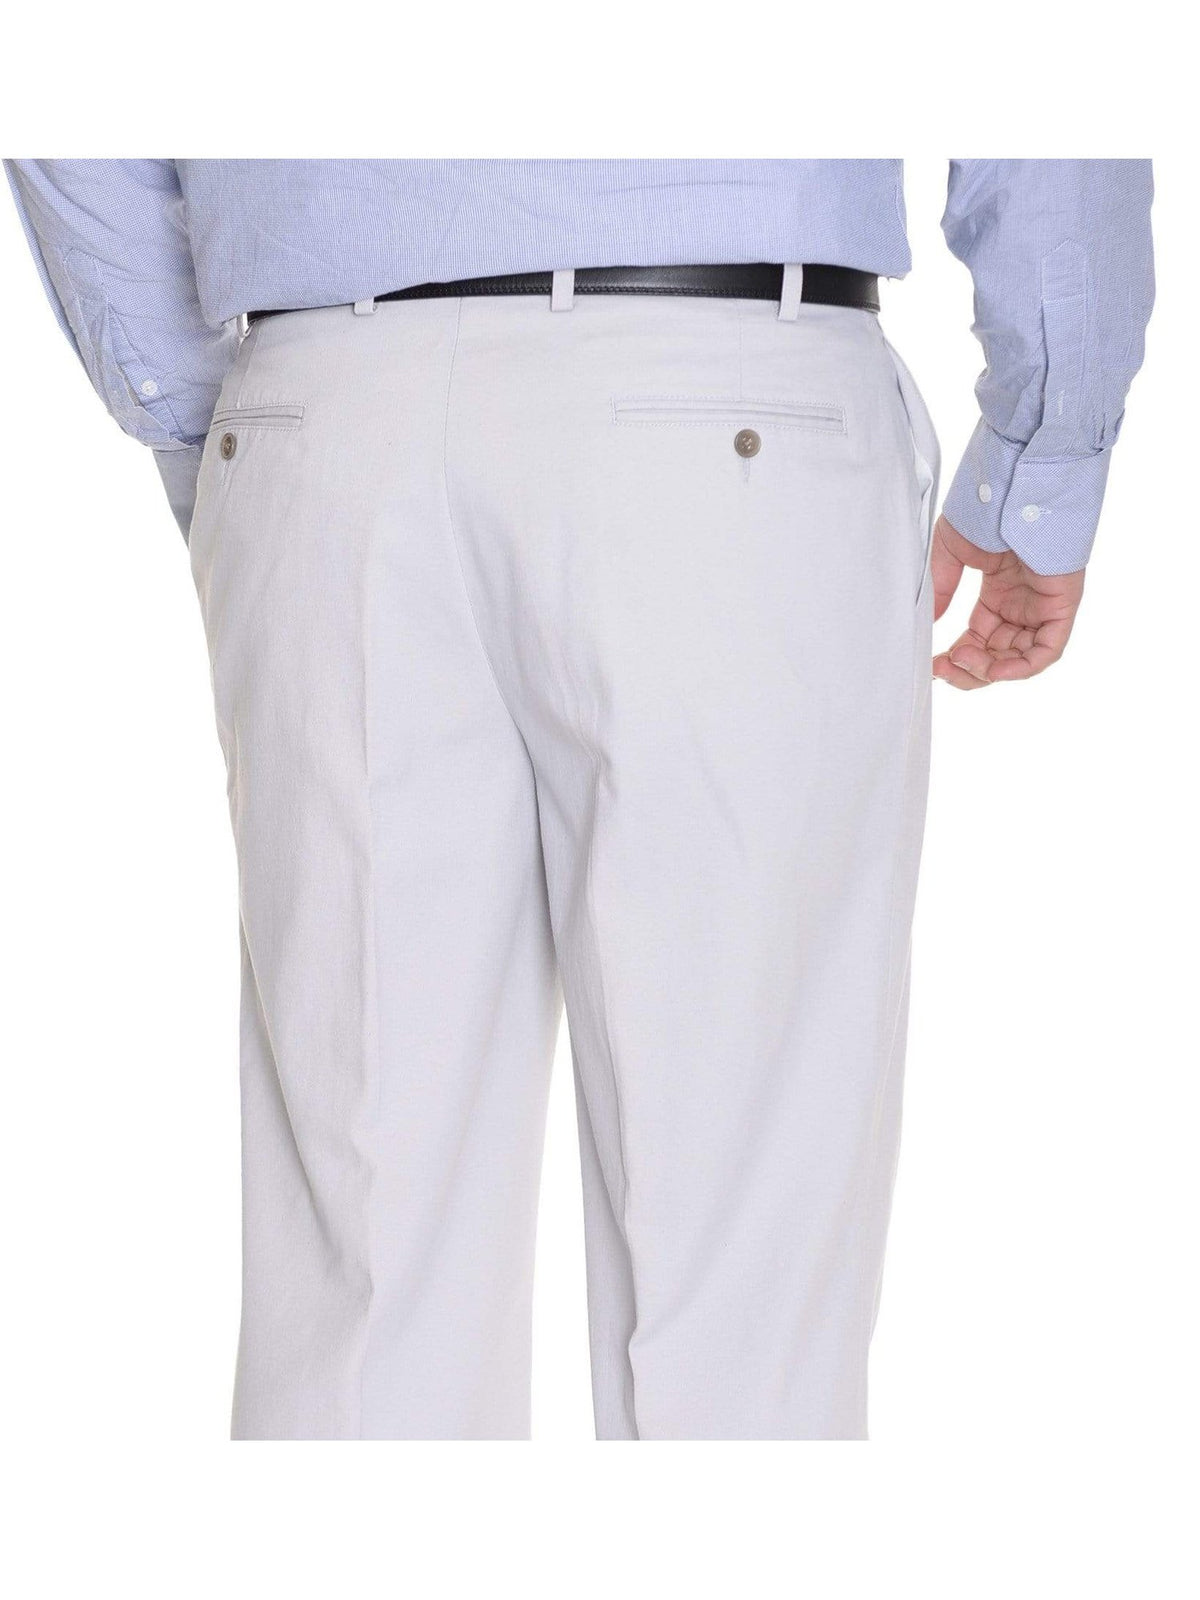 back view of cotton chino pants